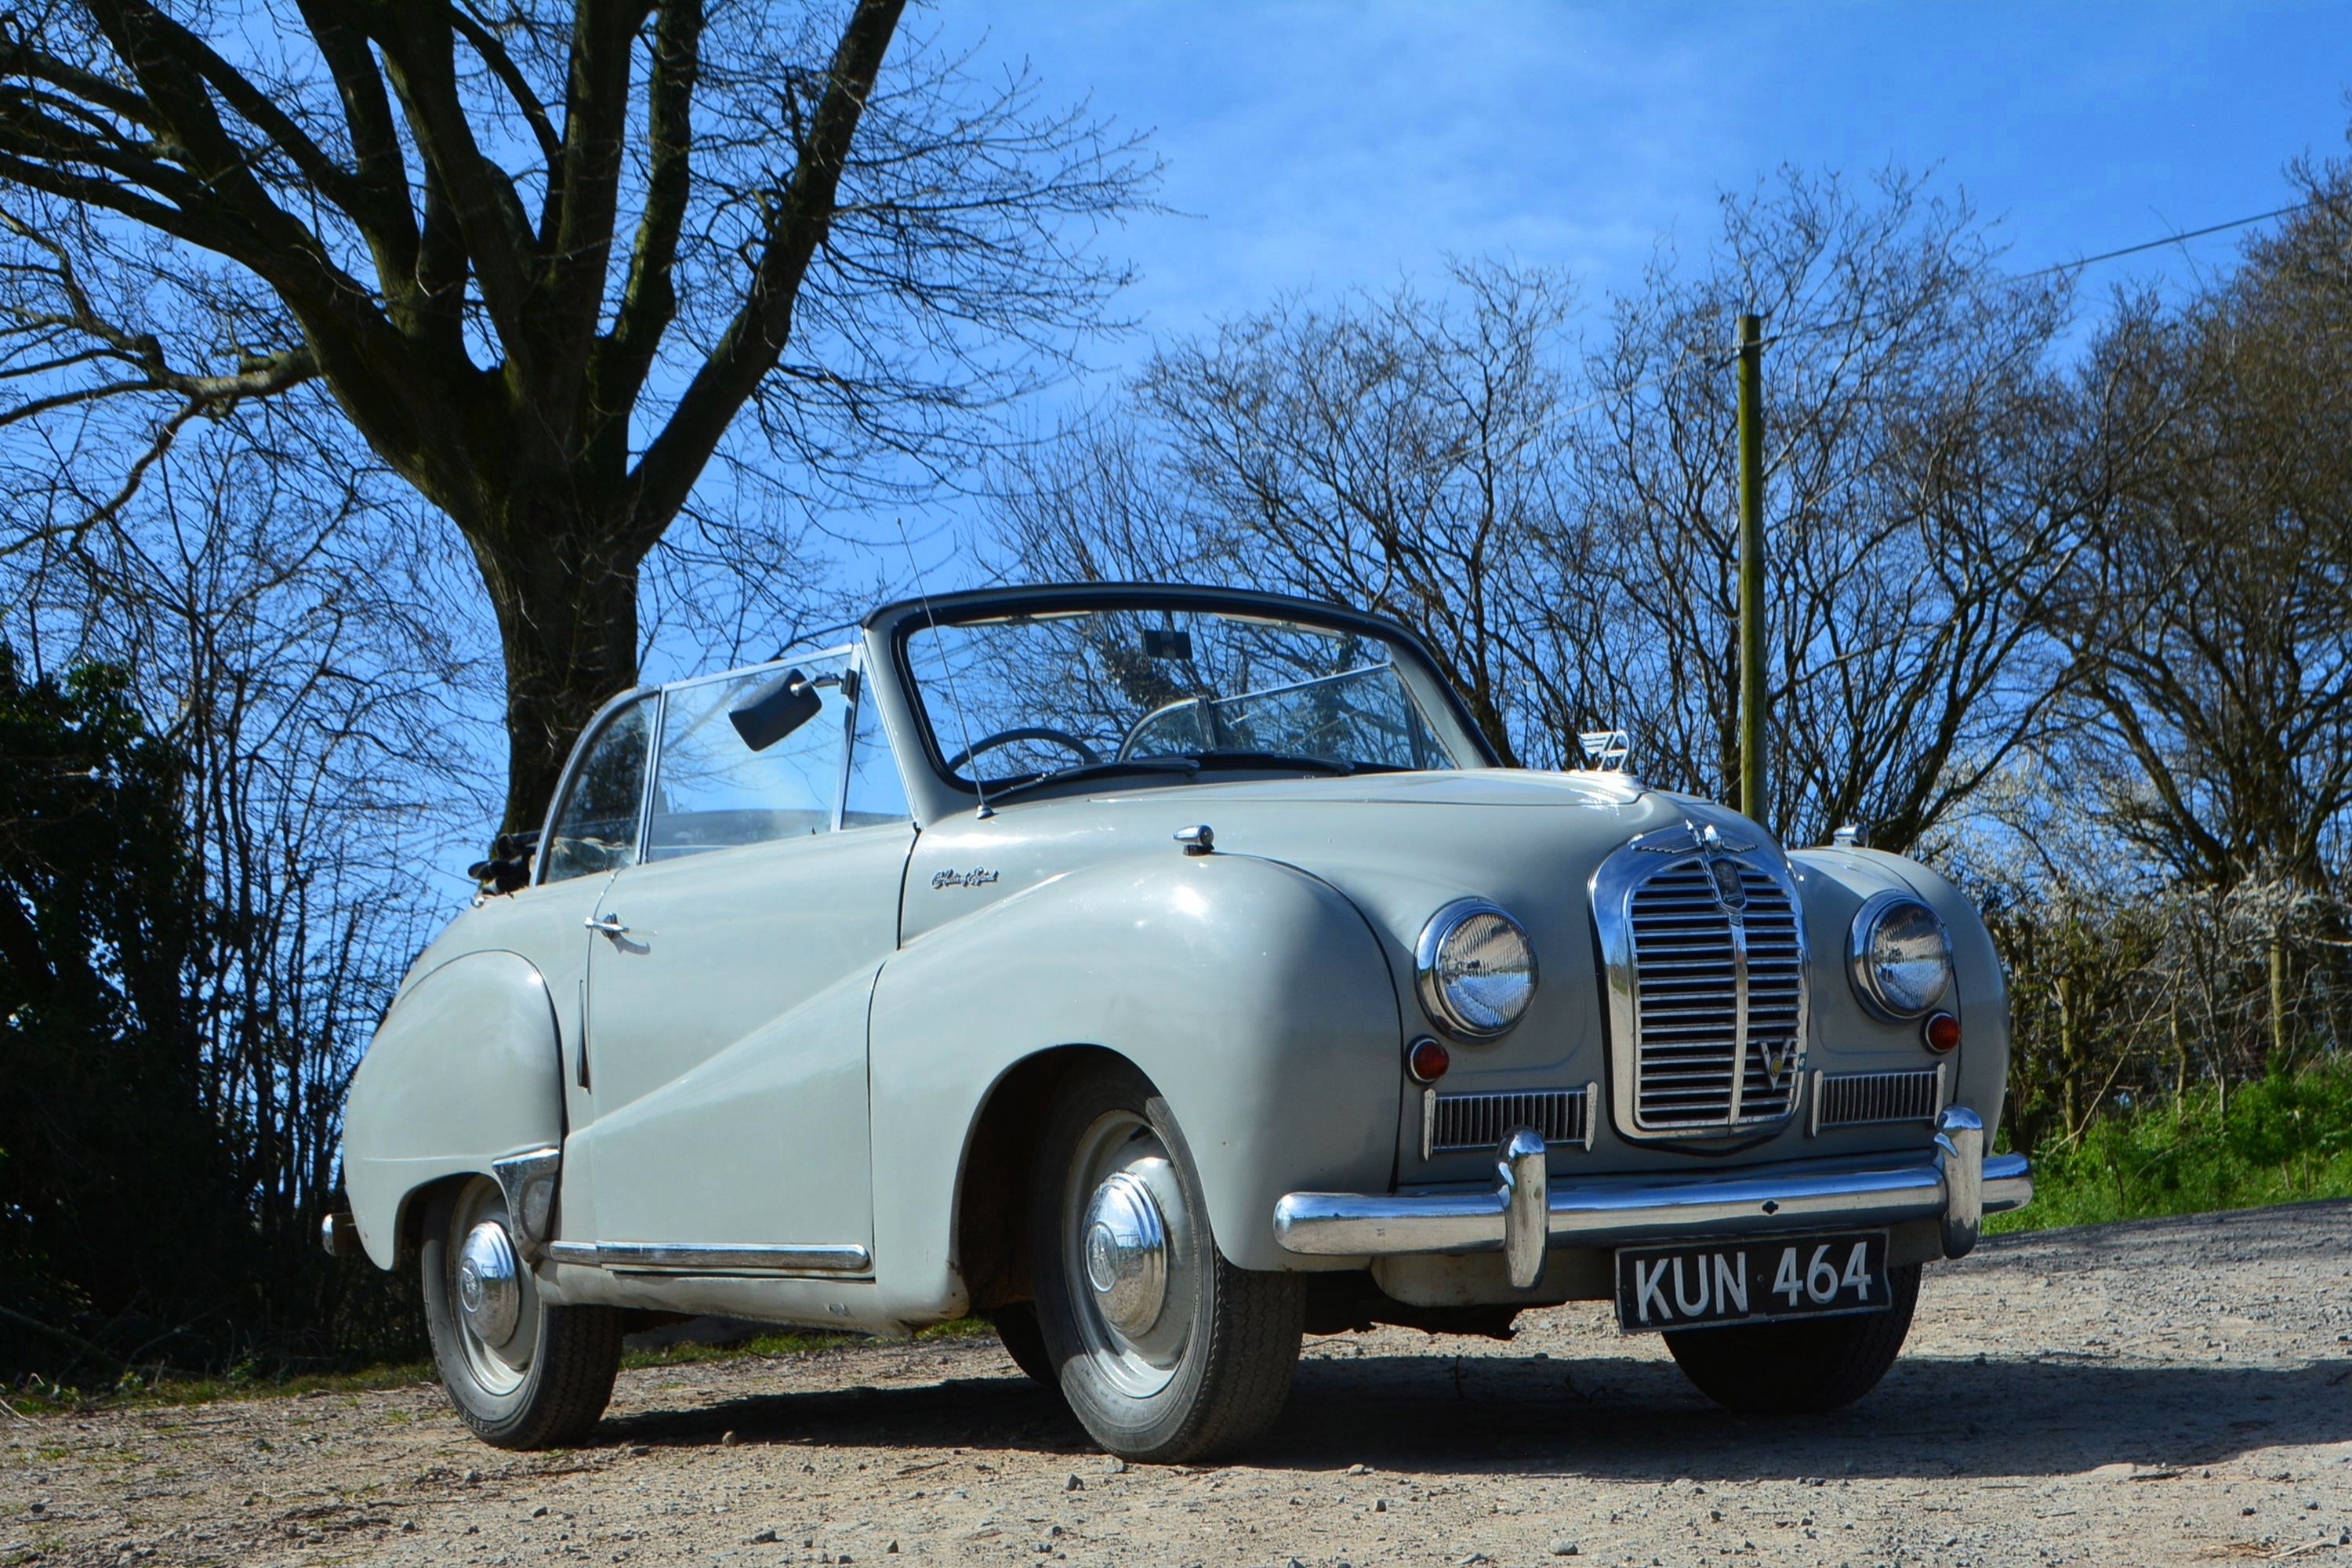 Austin A40 Somerset Coupe